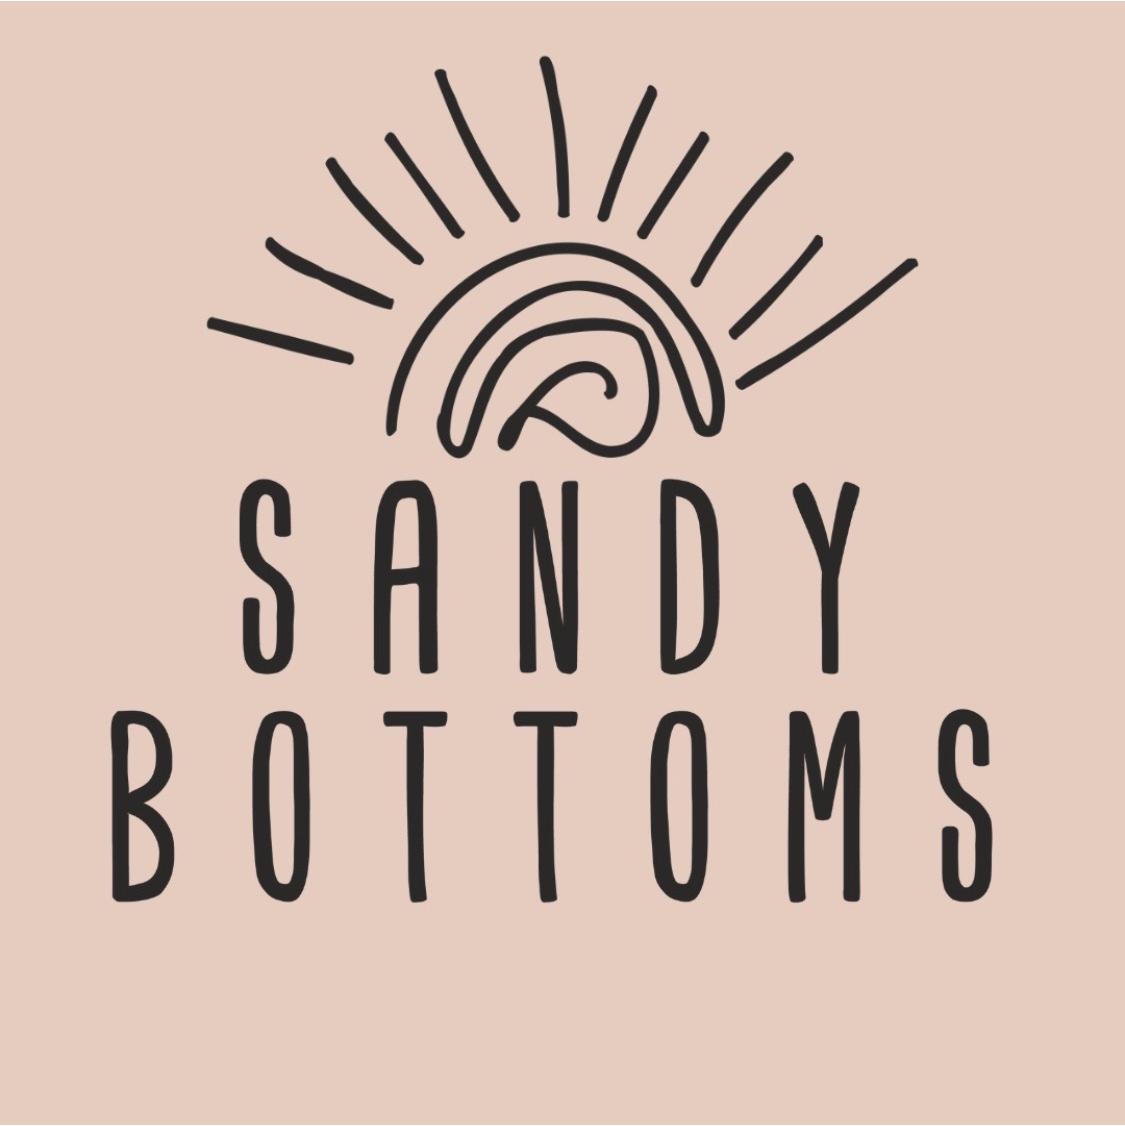 Sandy Bottoms's images